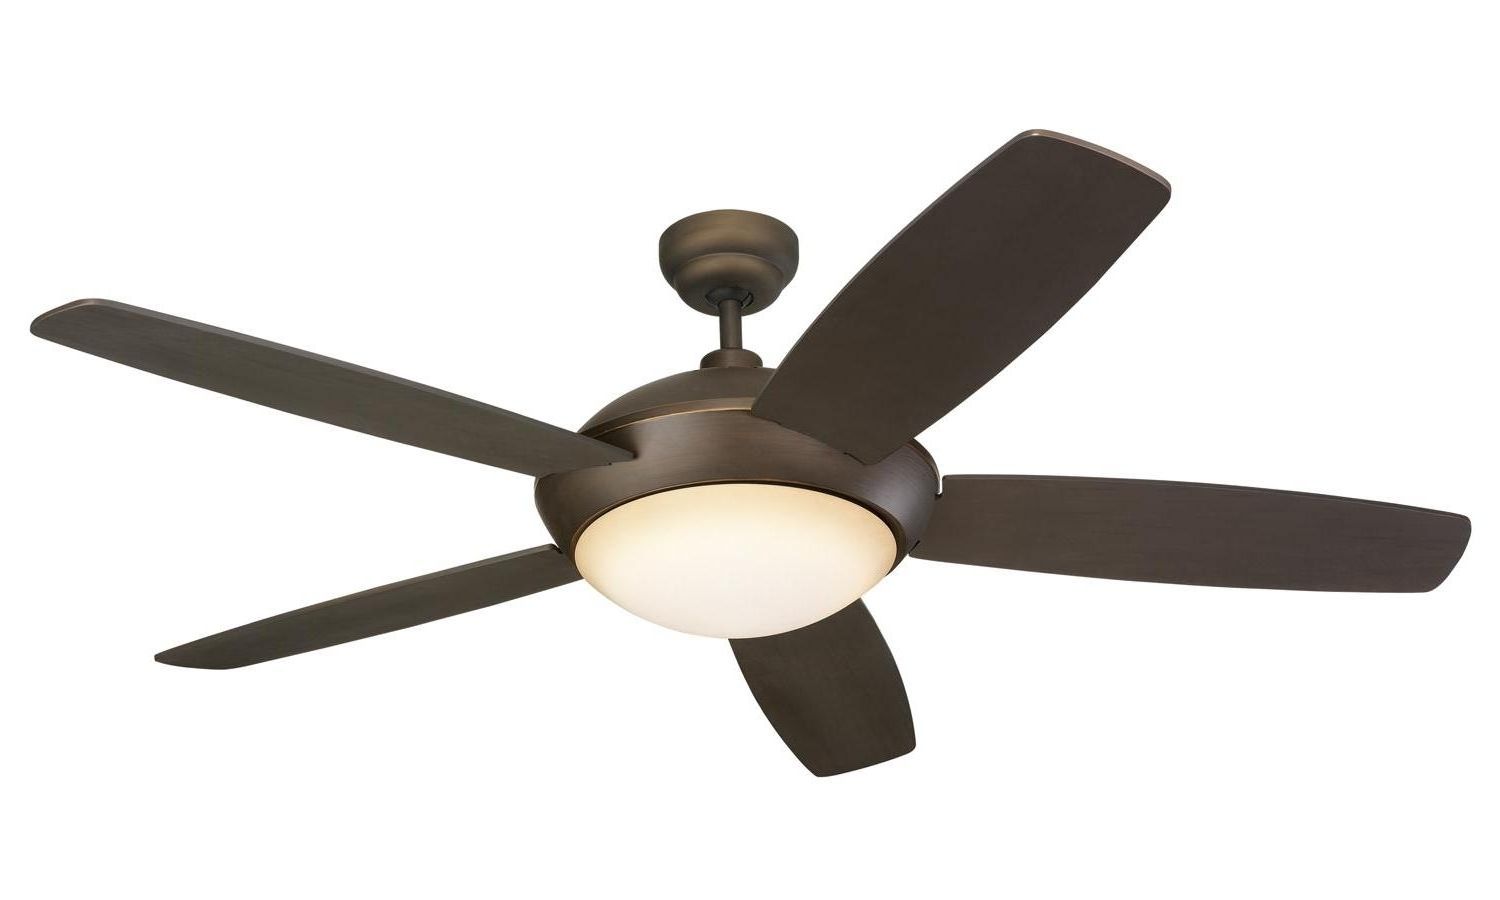 Outdoor Ceiling Fans With Remote Inside Fashionable Functional Ceiling Fans With Lights And Remote (View 15 of 20)